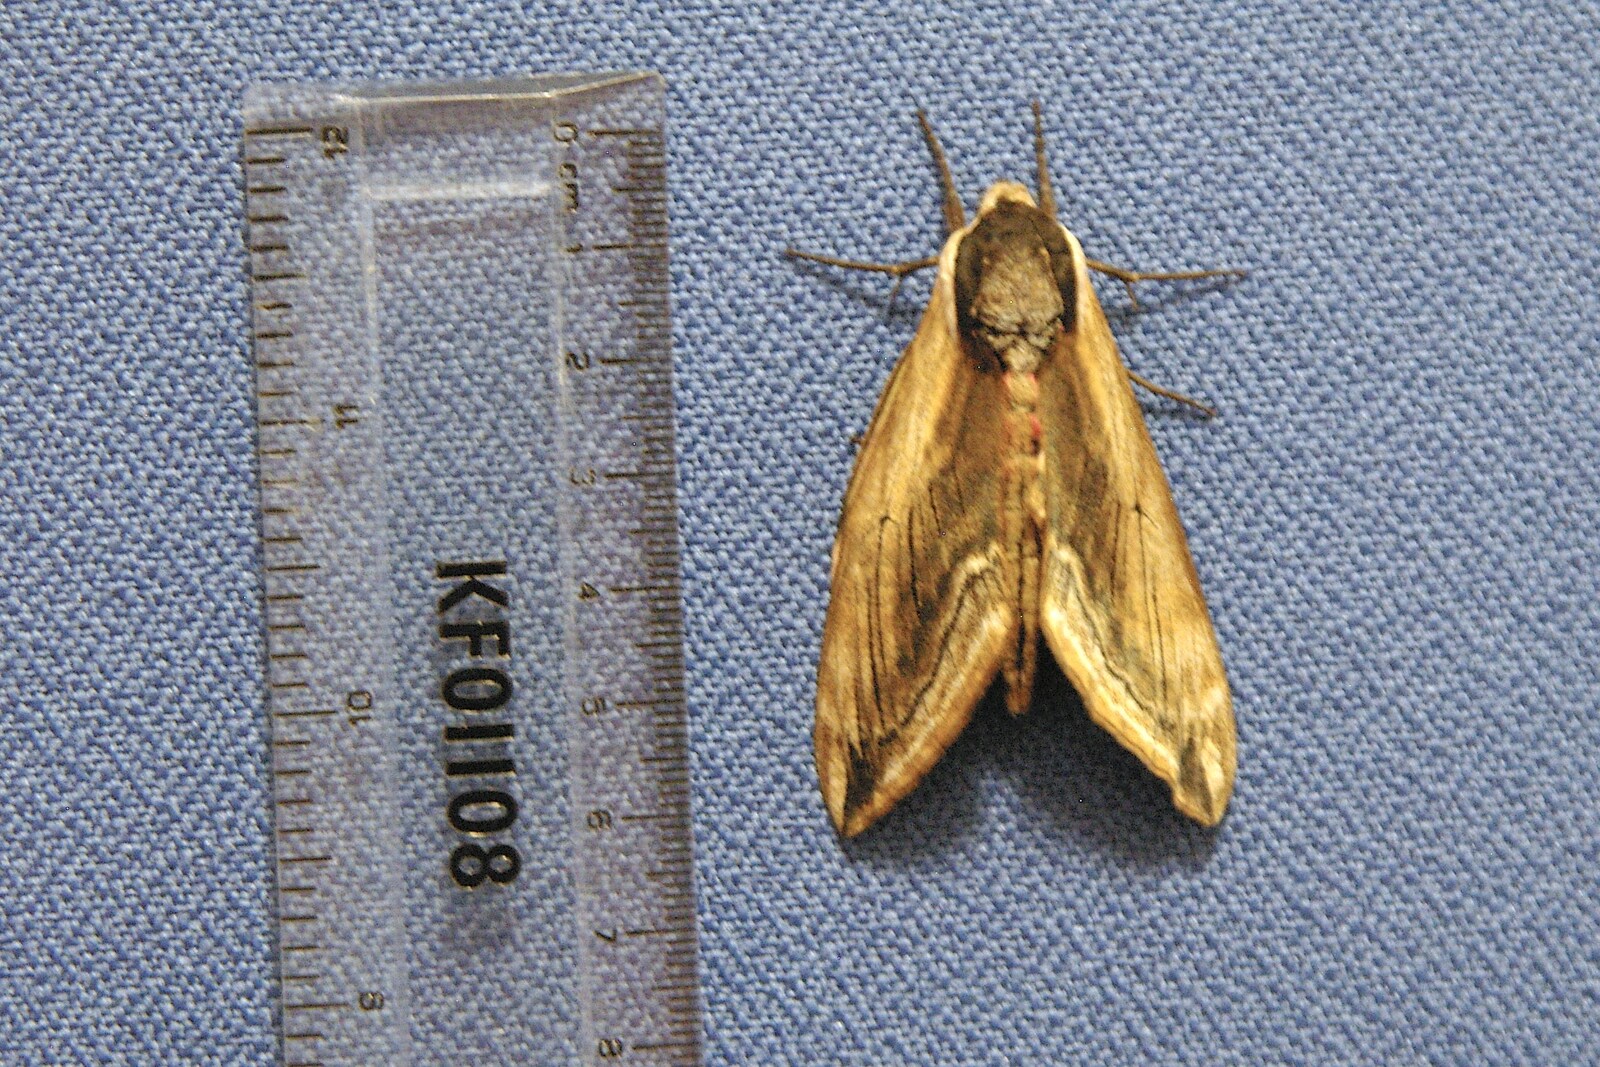 A 6cm moth lands in the upstairs office at work from Shakespeare at St. John's, Parker's Piece and the A14's Worst Day - 17th July 2006